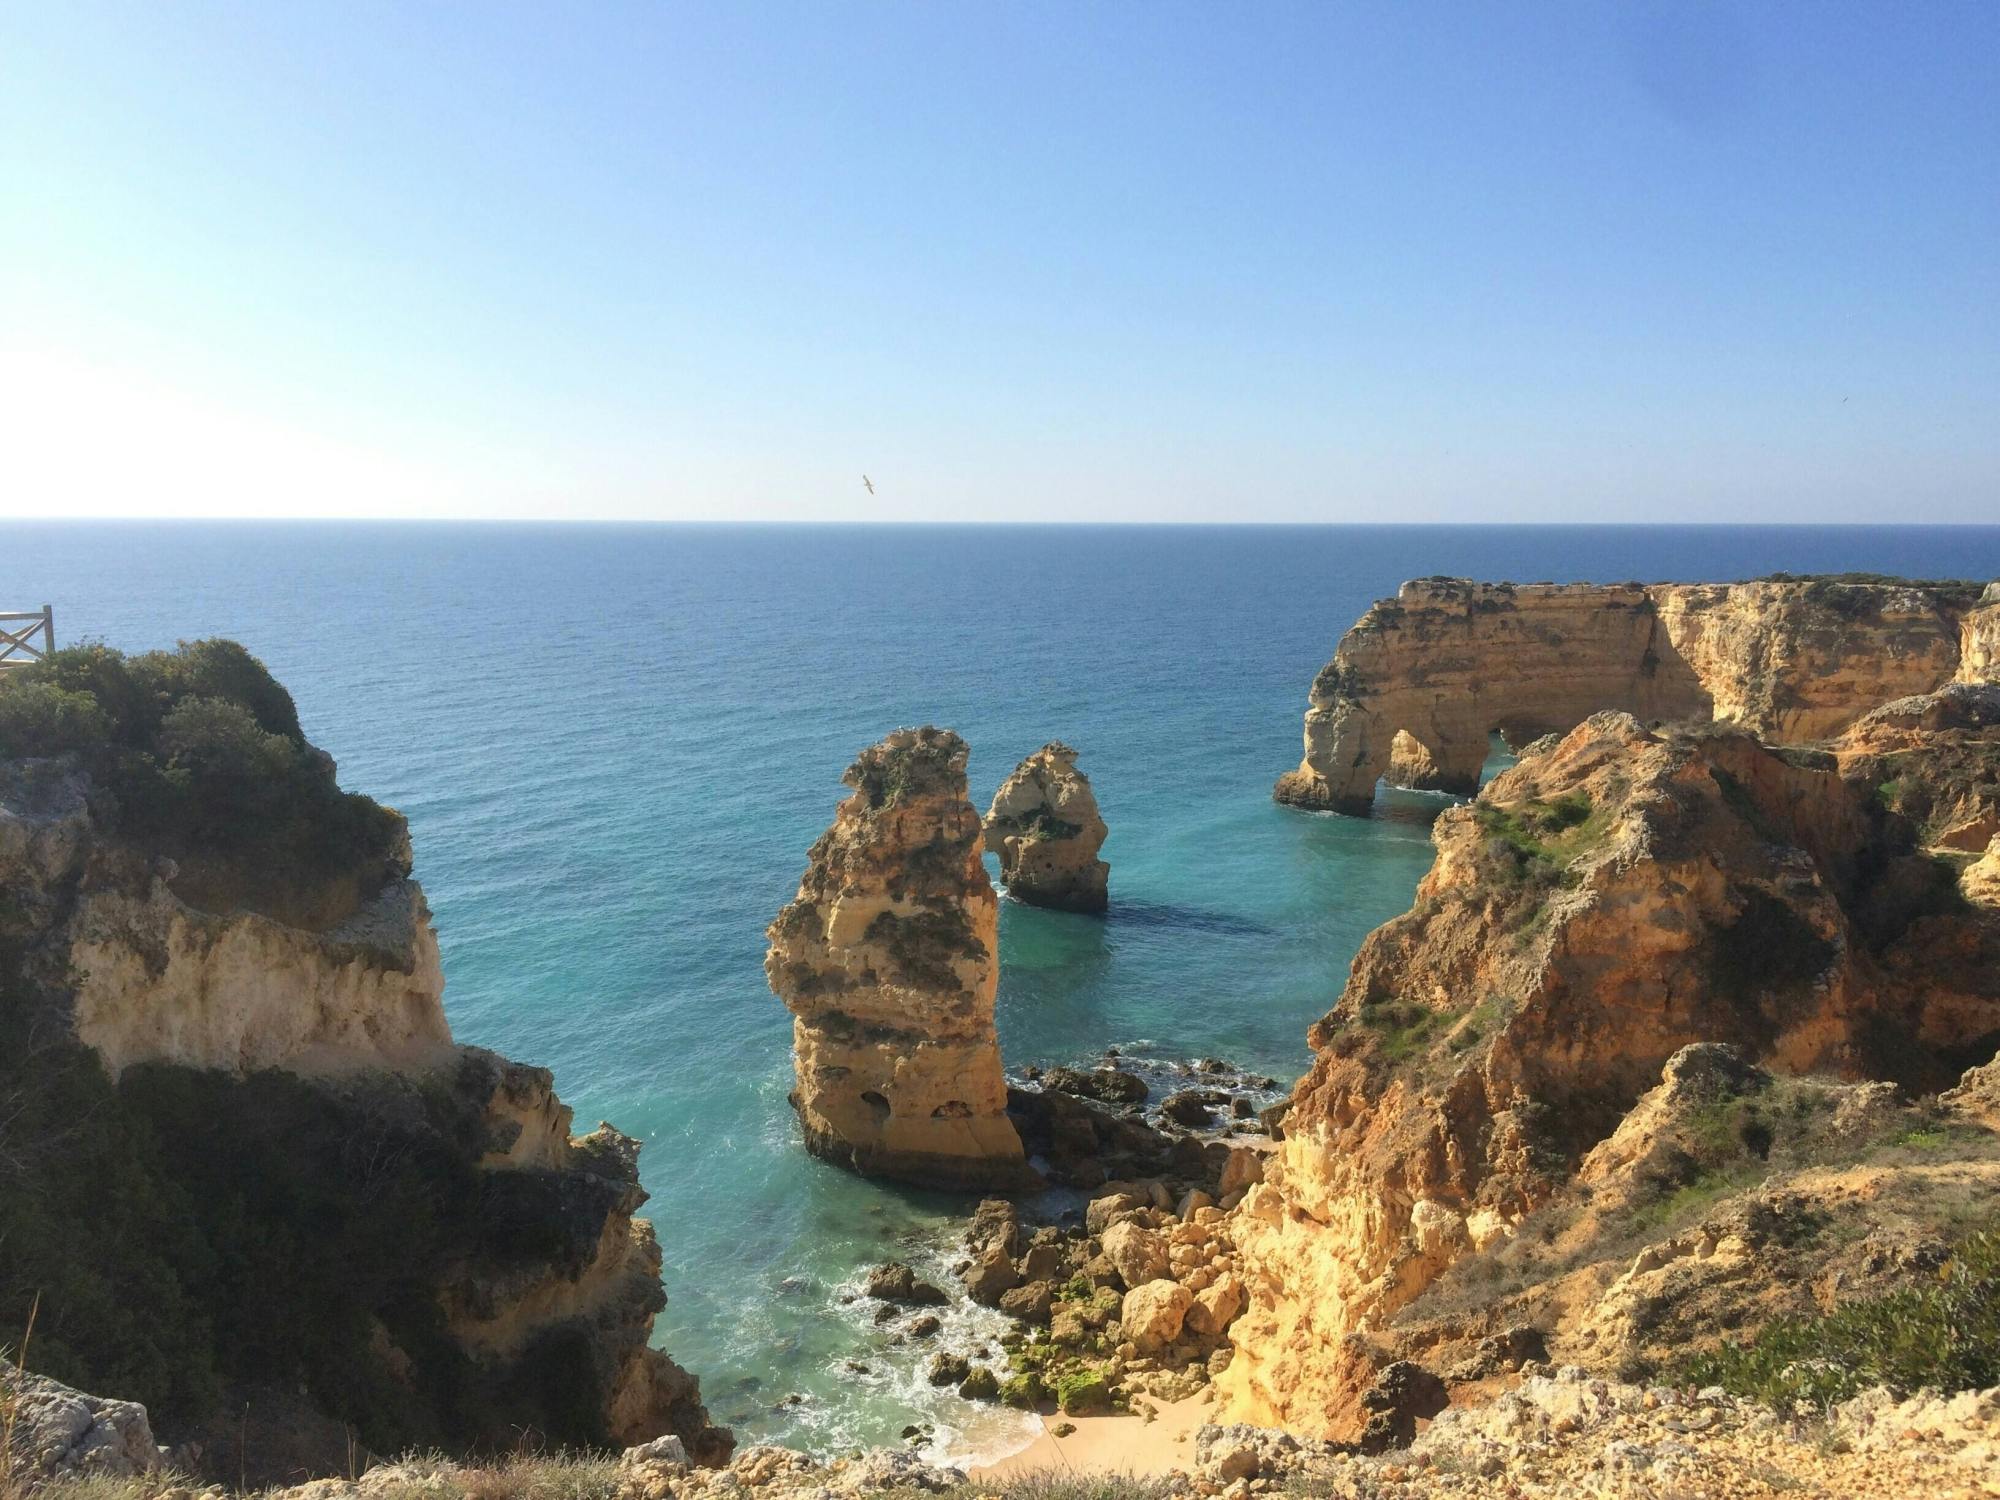 Algarve Cliffs by Land and Sea